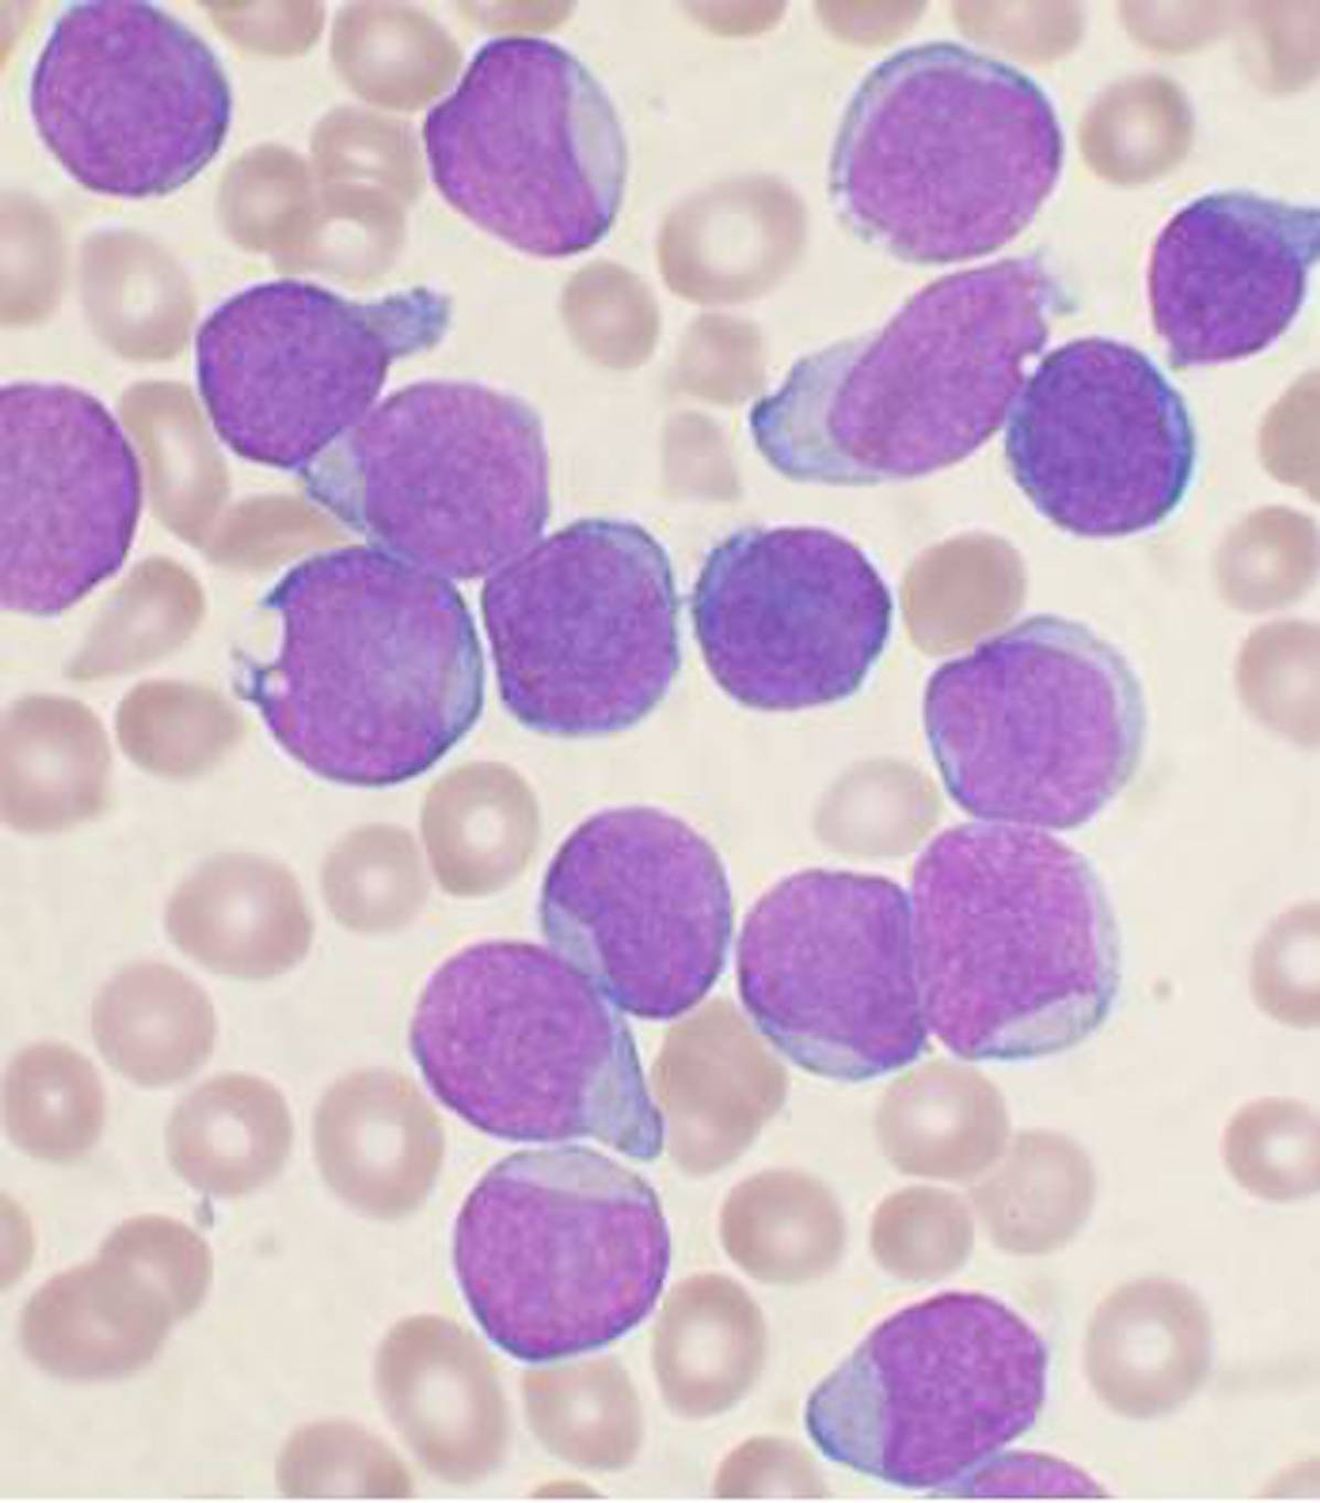 A Wright's stained bone marrow aspirate smear of patient with precursor B-cell acute lymphoblastic leukemia. Image credit: VashiDonsk